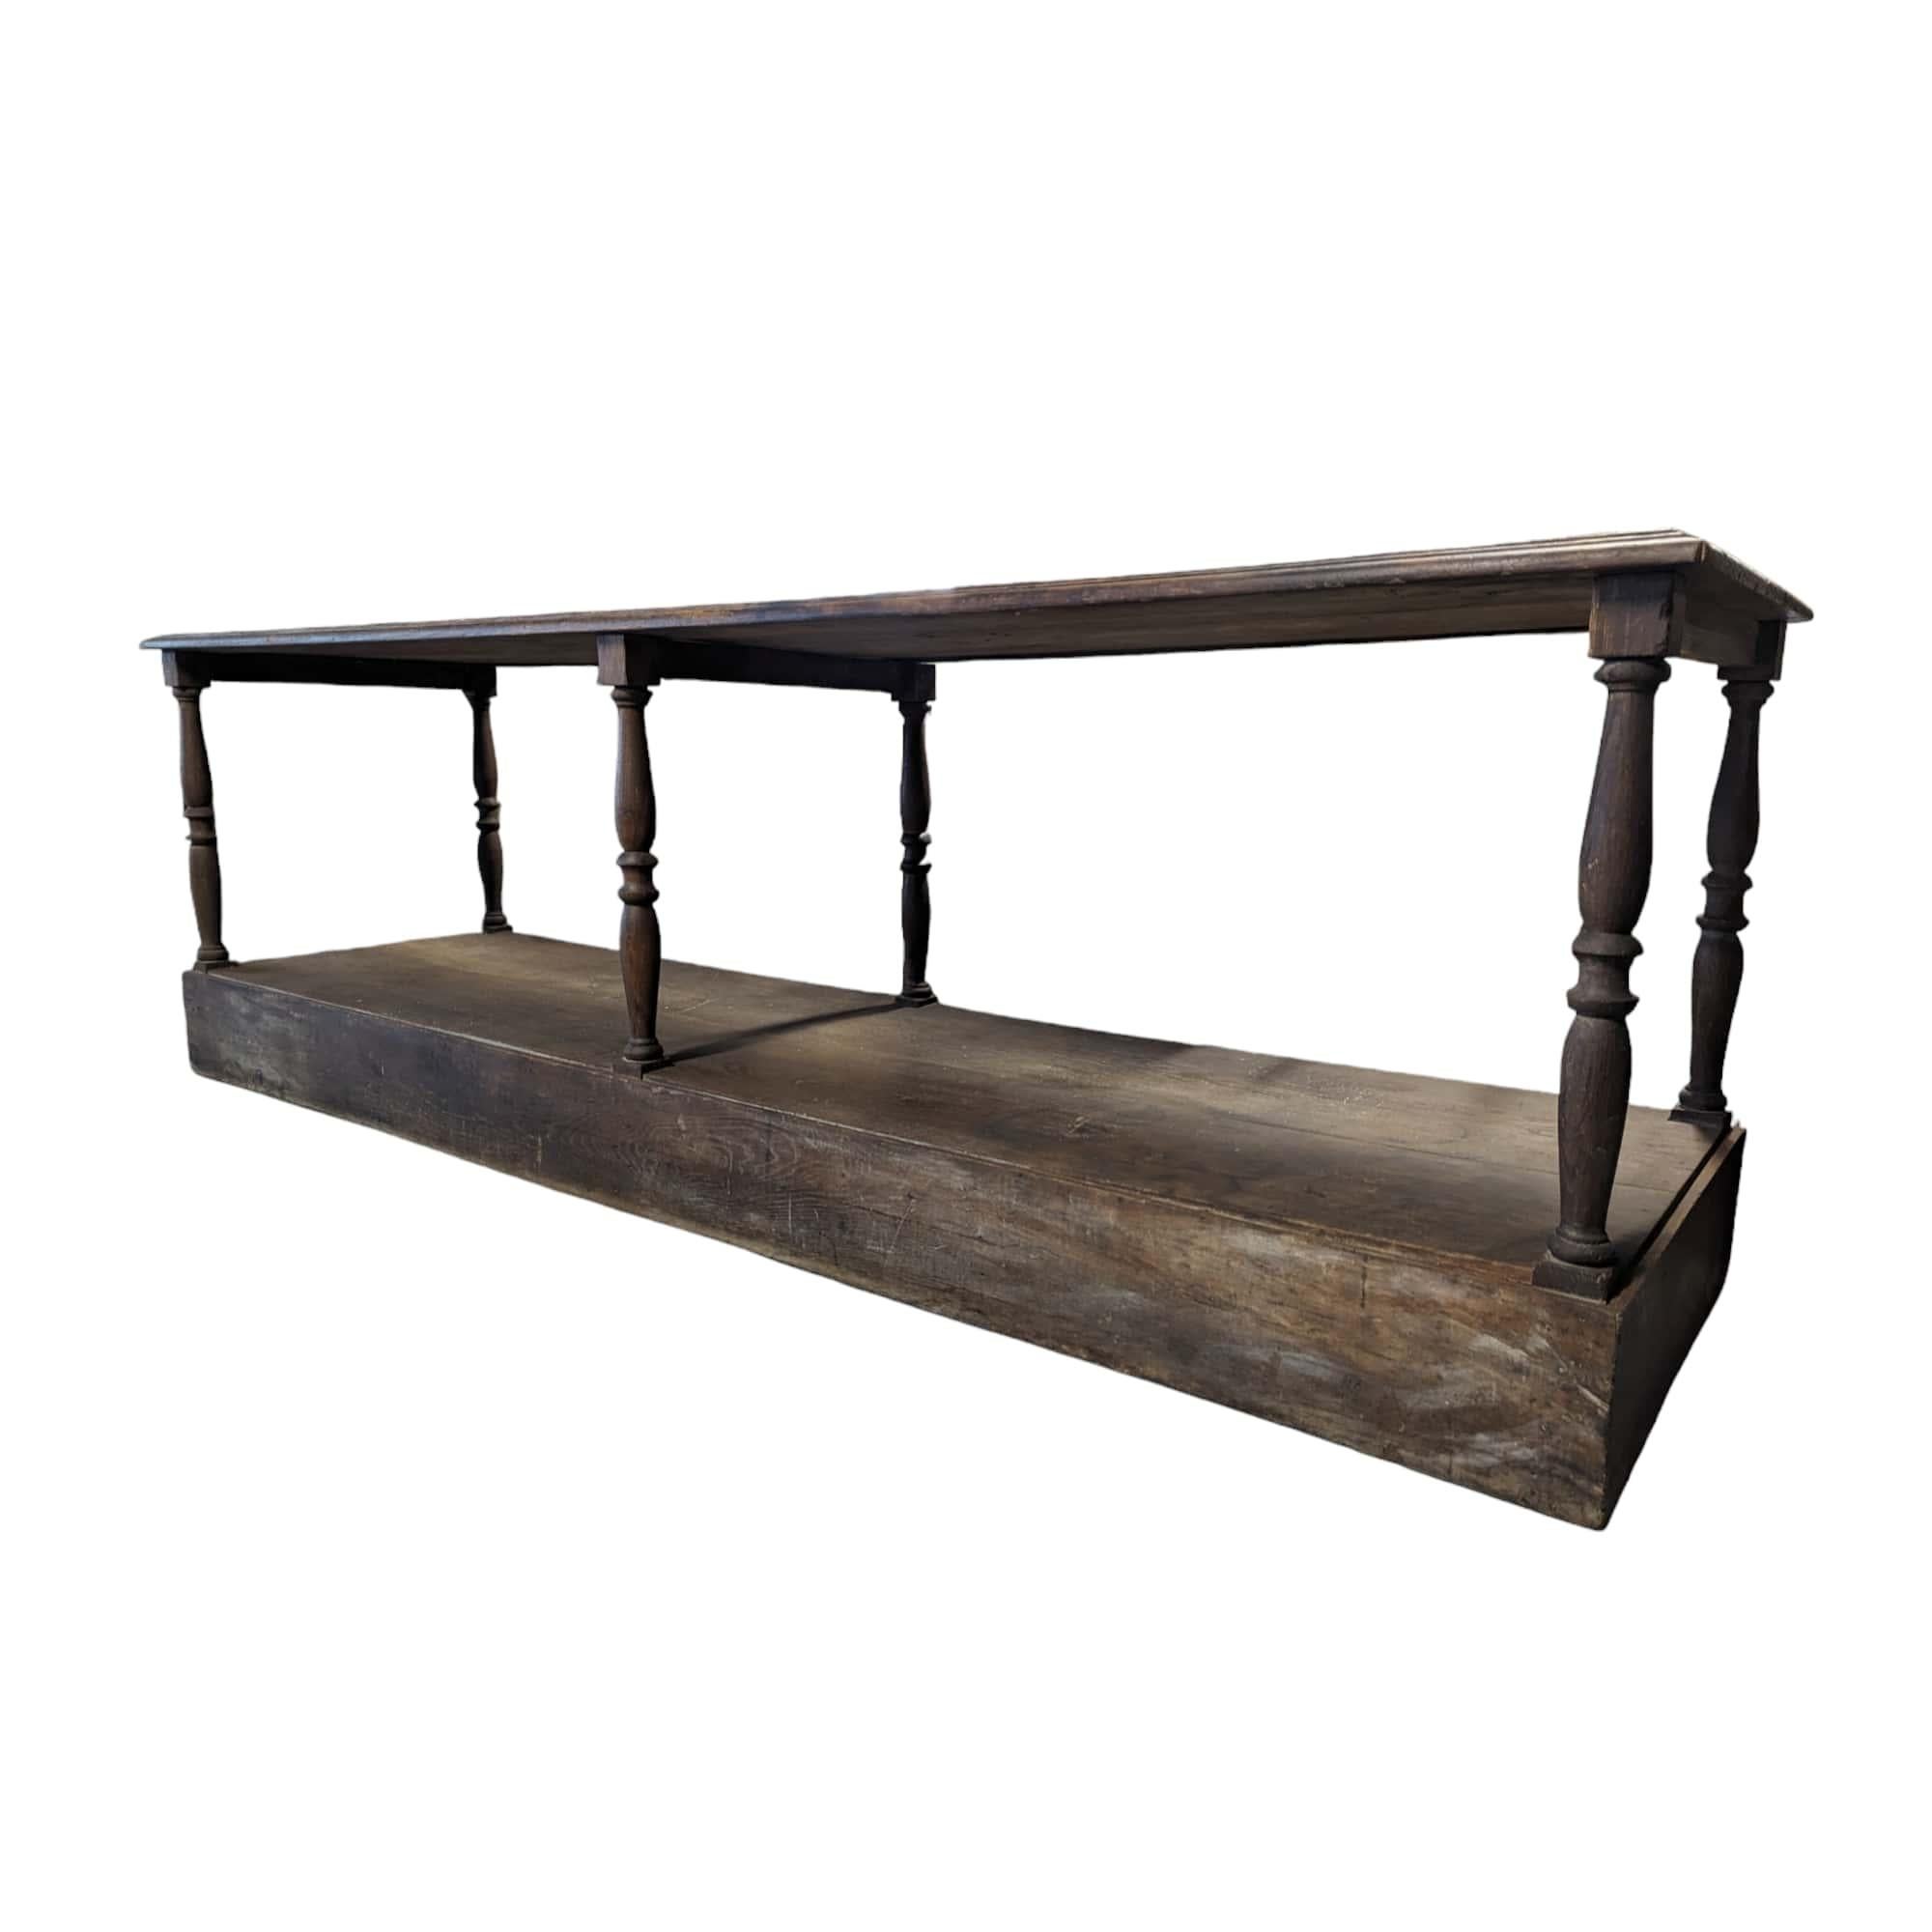 Coming from France. Immerse yourself in history with this remarkable oak draper's table, dating from around 1850 and originating in France, with a beautiful patina that bears witness to its storied past.

This authentic piece embodies the rustic